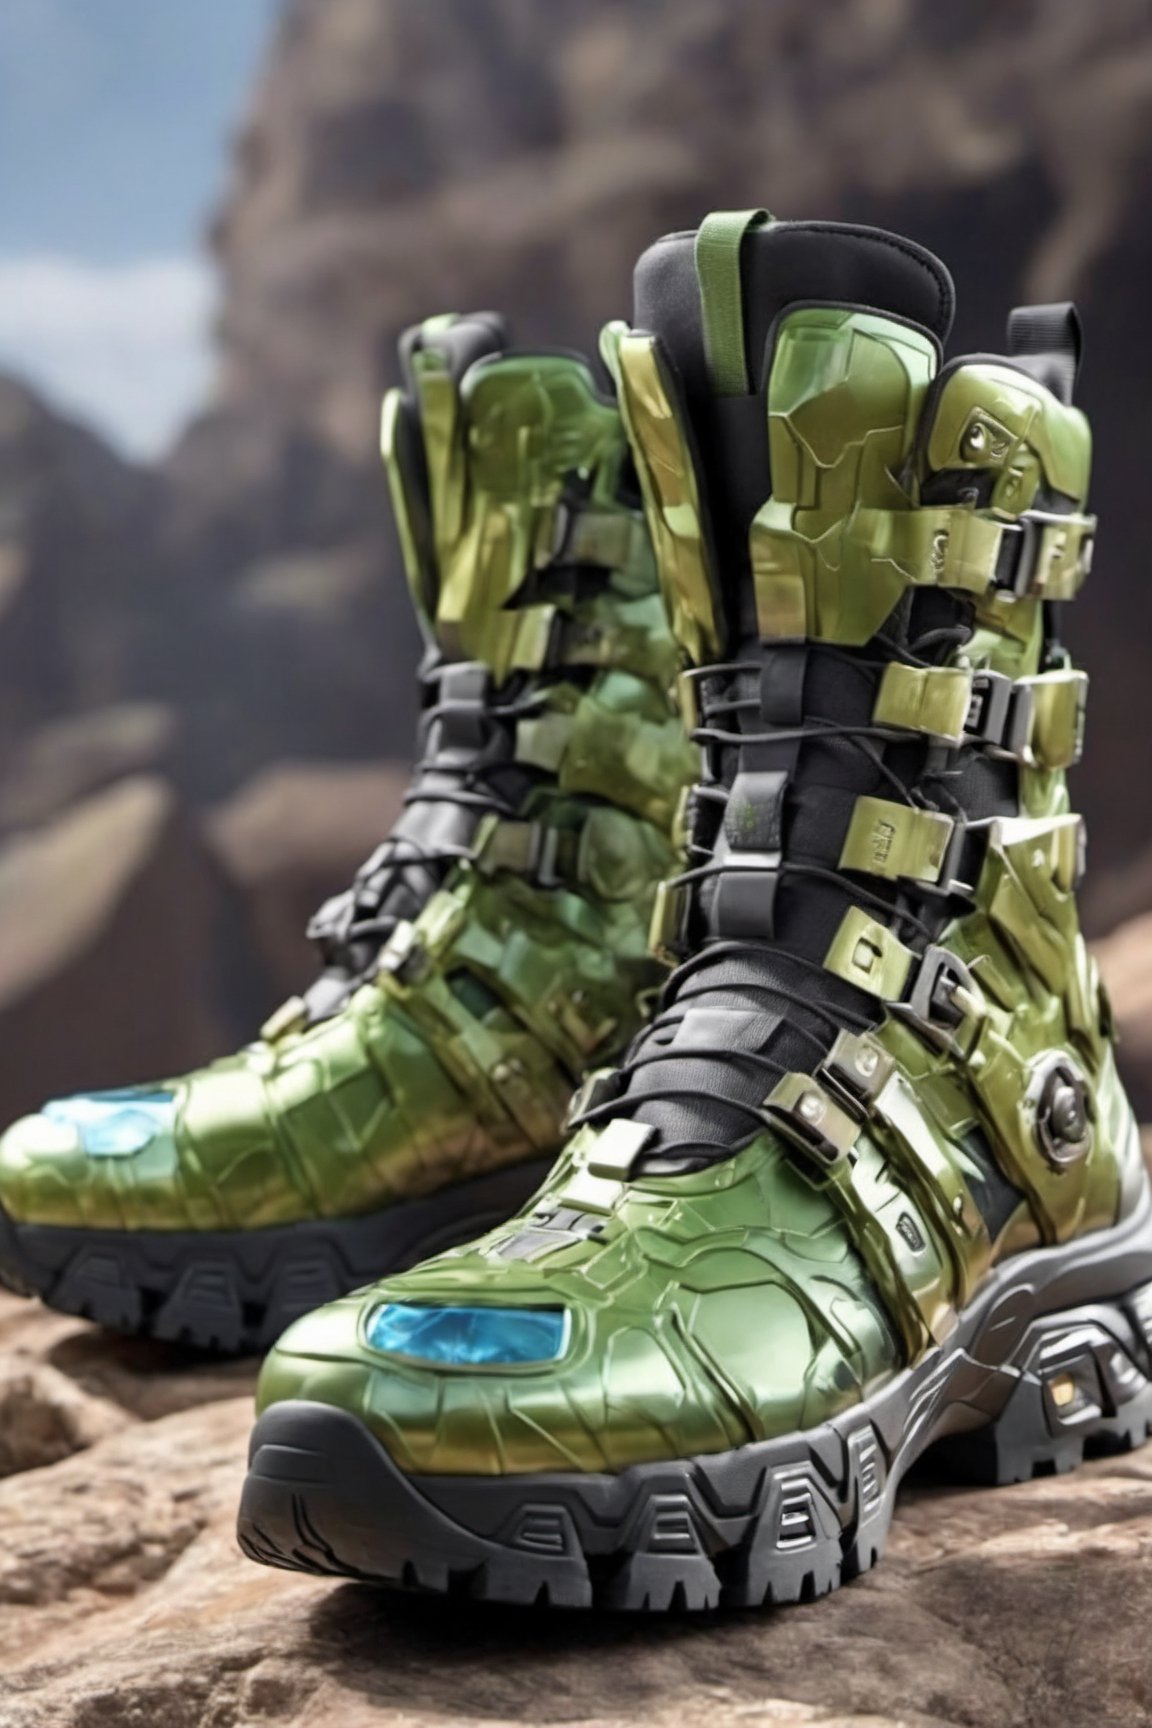 futuristic crypto hulk shoes , Hiking shoes inspire by hulk design, Salomon brand, high_resolution, high detail, realistic, realism,cyborg style,Colourful cat ,steampunk style